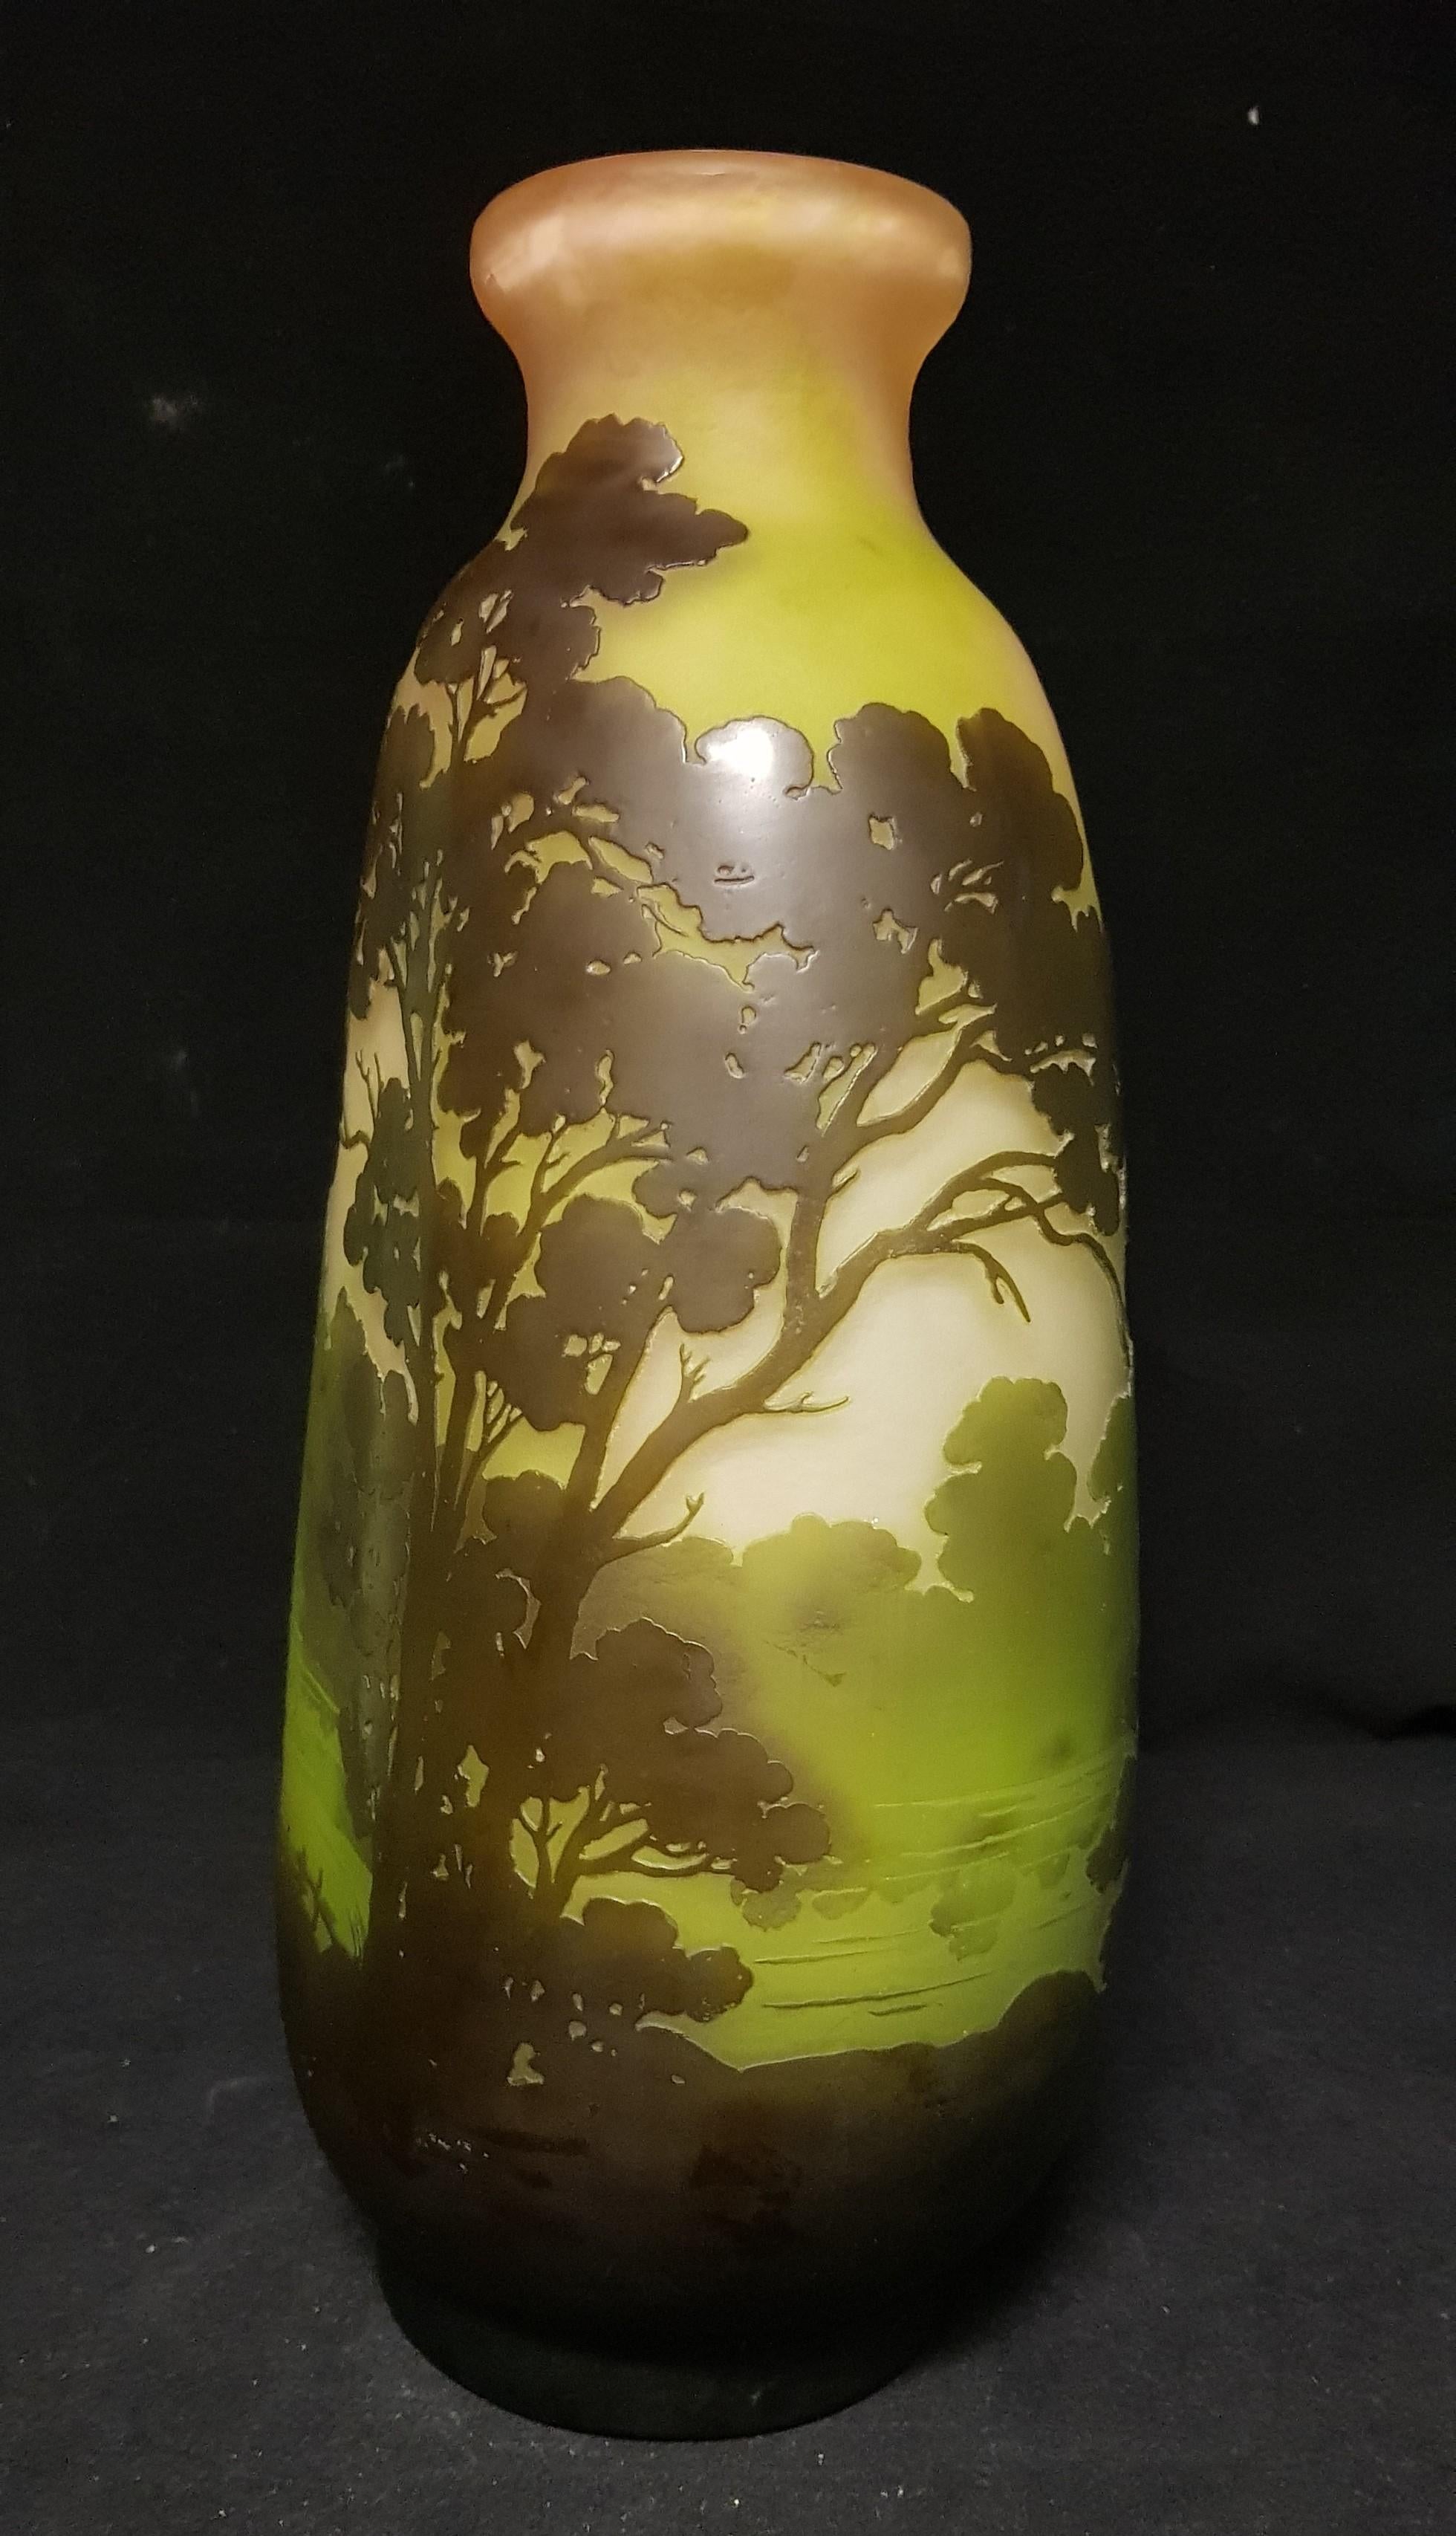 Glass vase with decoration of the lake landscape in the colors of green and brown
signed.